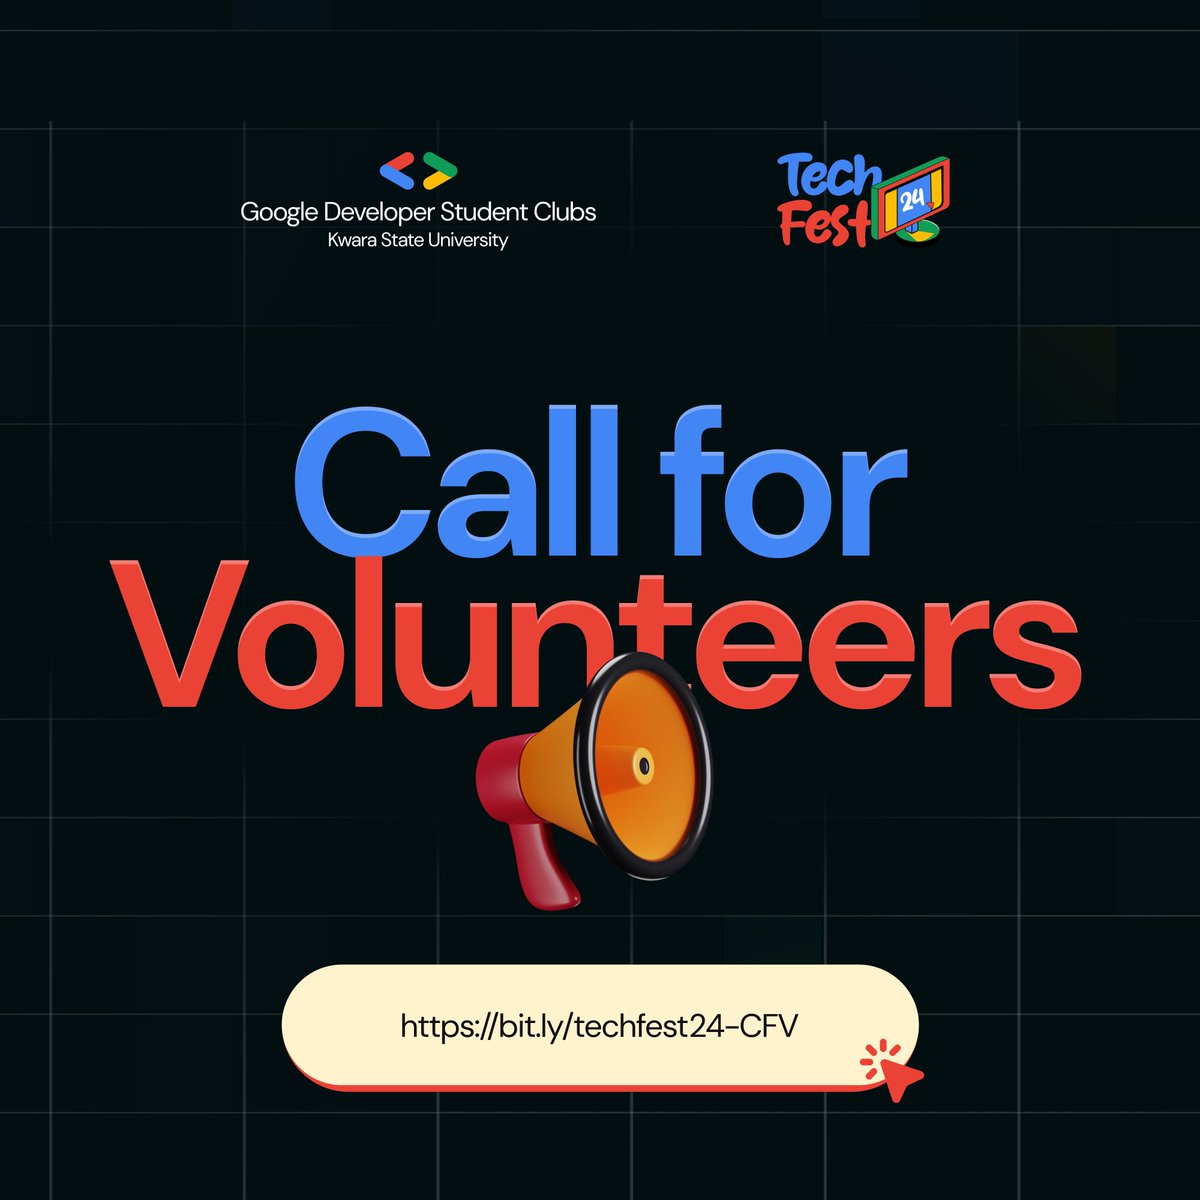 Are you an active volunteer ? Do you like participating in events for the greater good ? Are you passionate about tech ? Then, there is an opportunity for you to make an impact. Apply to be a volunteer today. Register here : bit.ly/techfest24-CFV